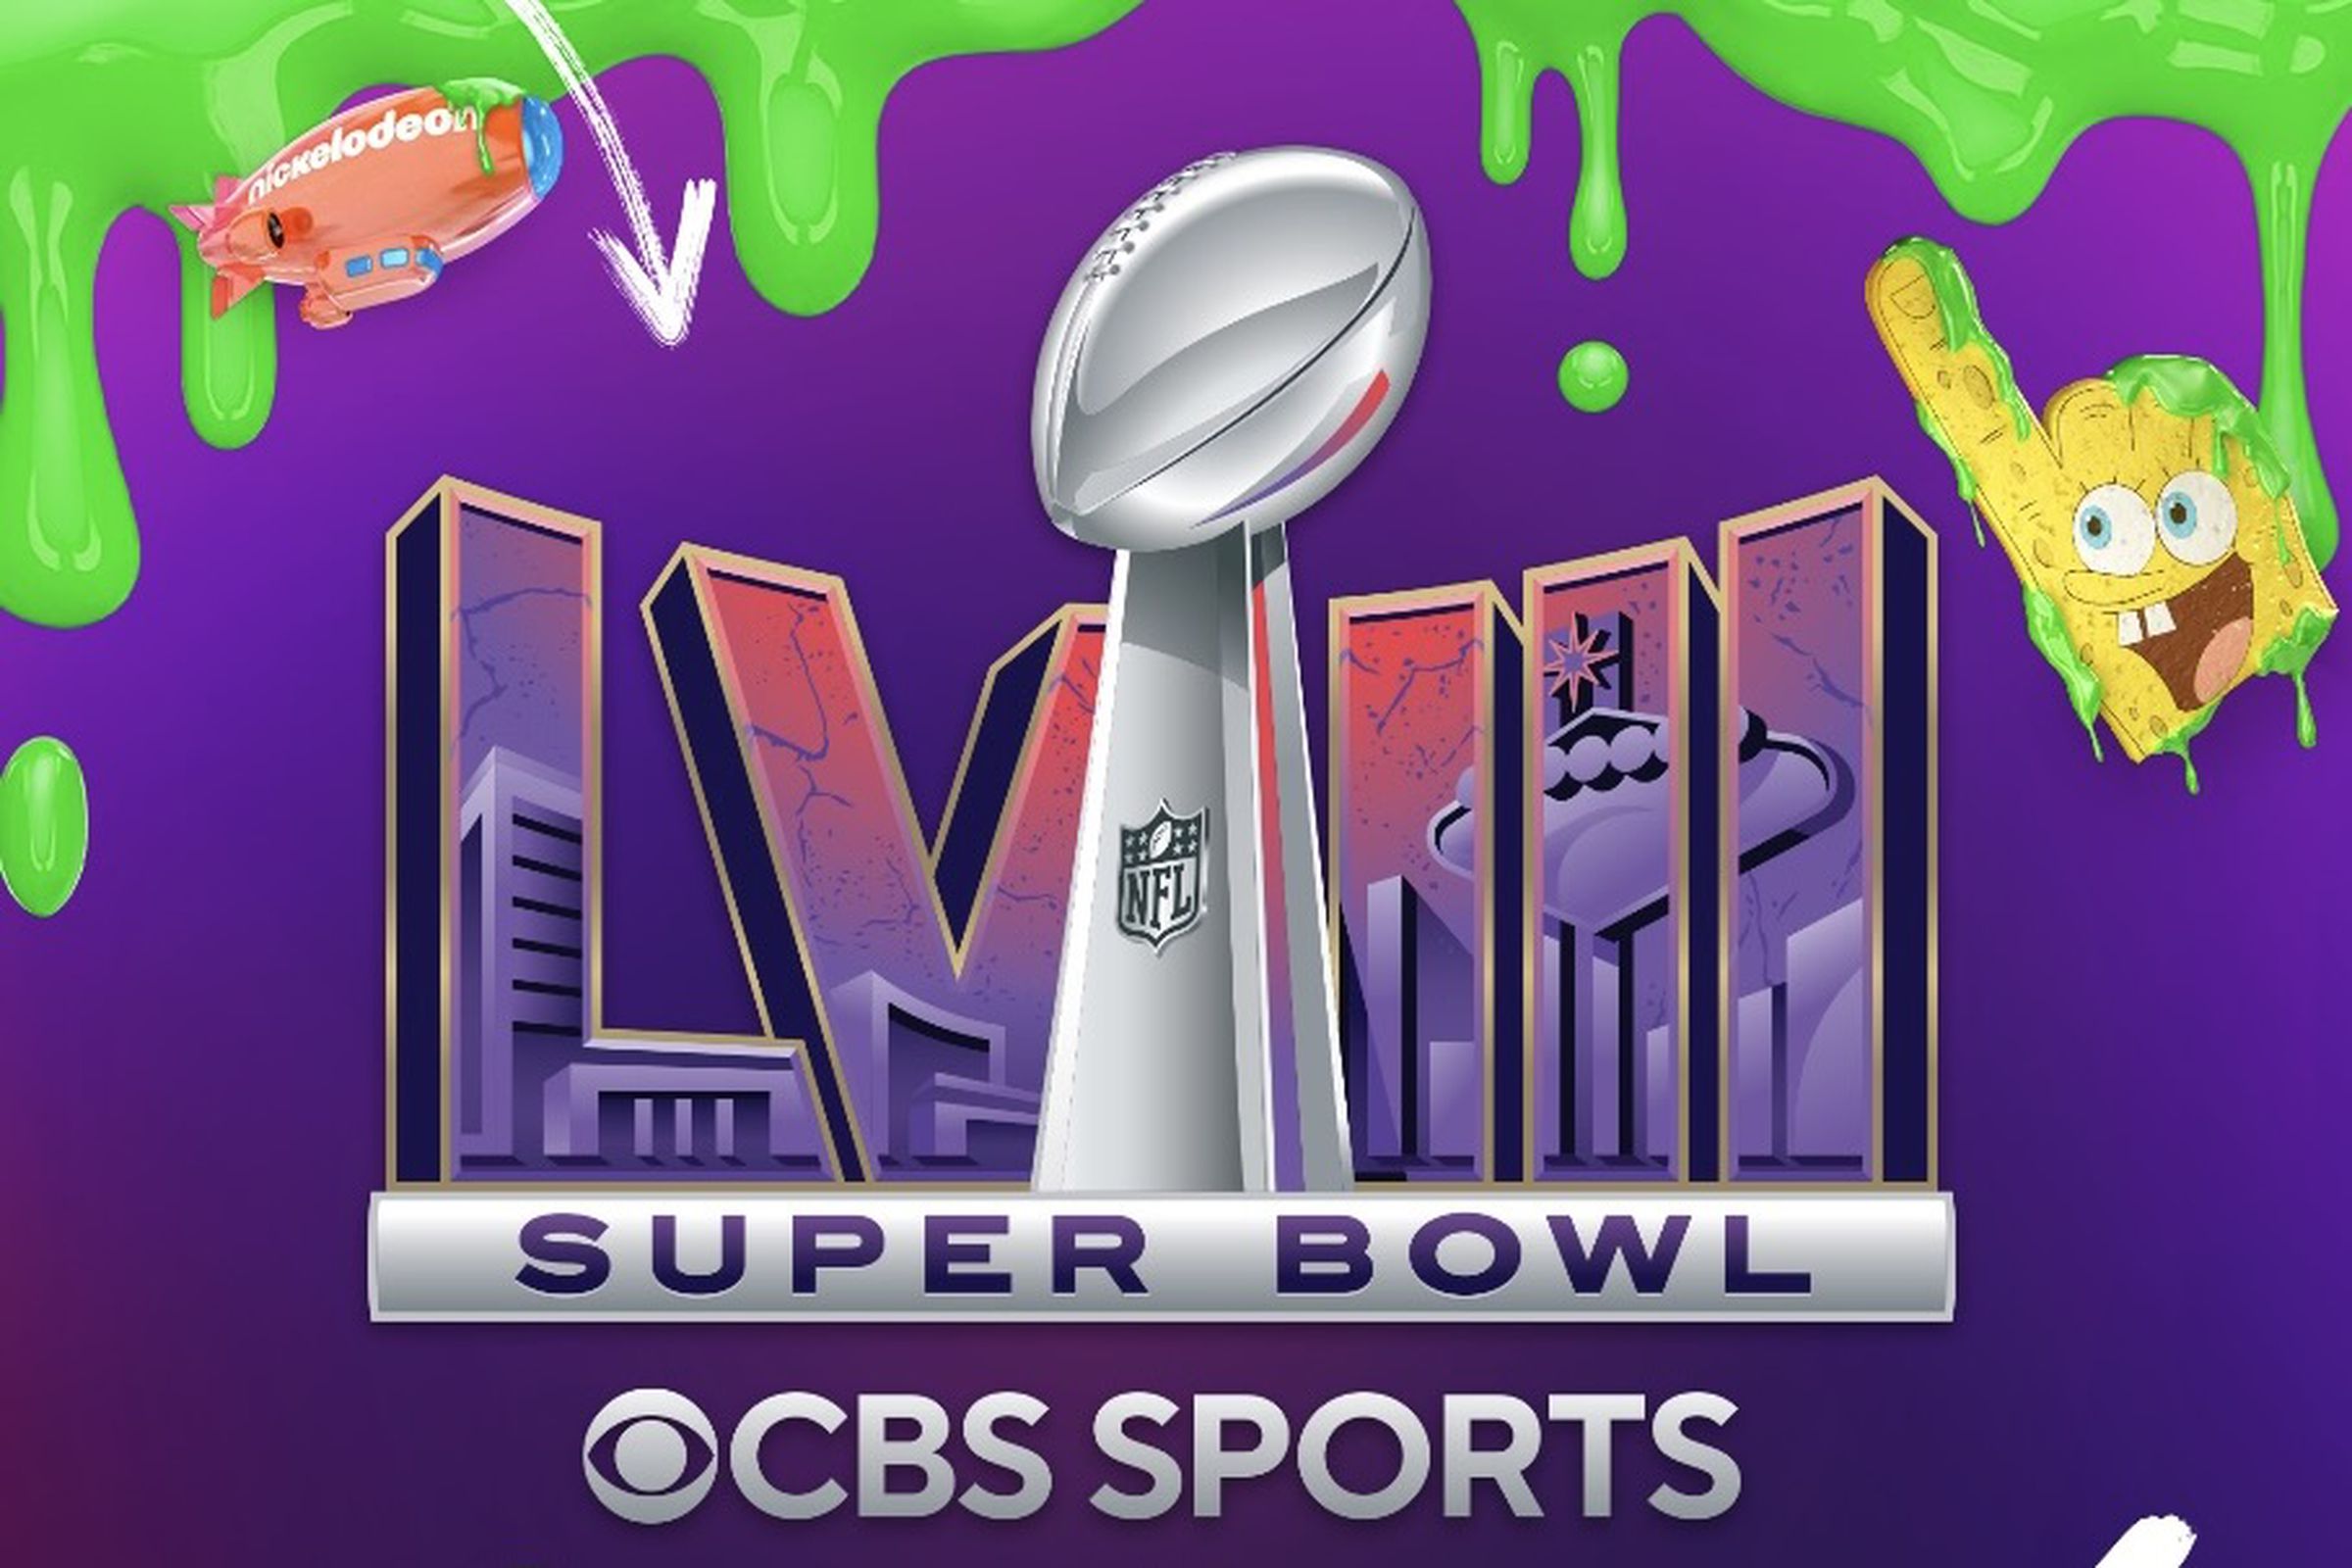 Super Bowl 58 logo with green slime dripping from the corners and a SpongeBob SquarePants number one bleacher glove.